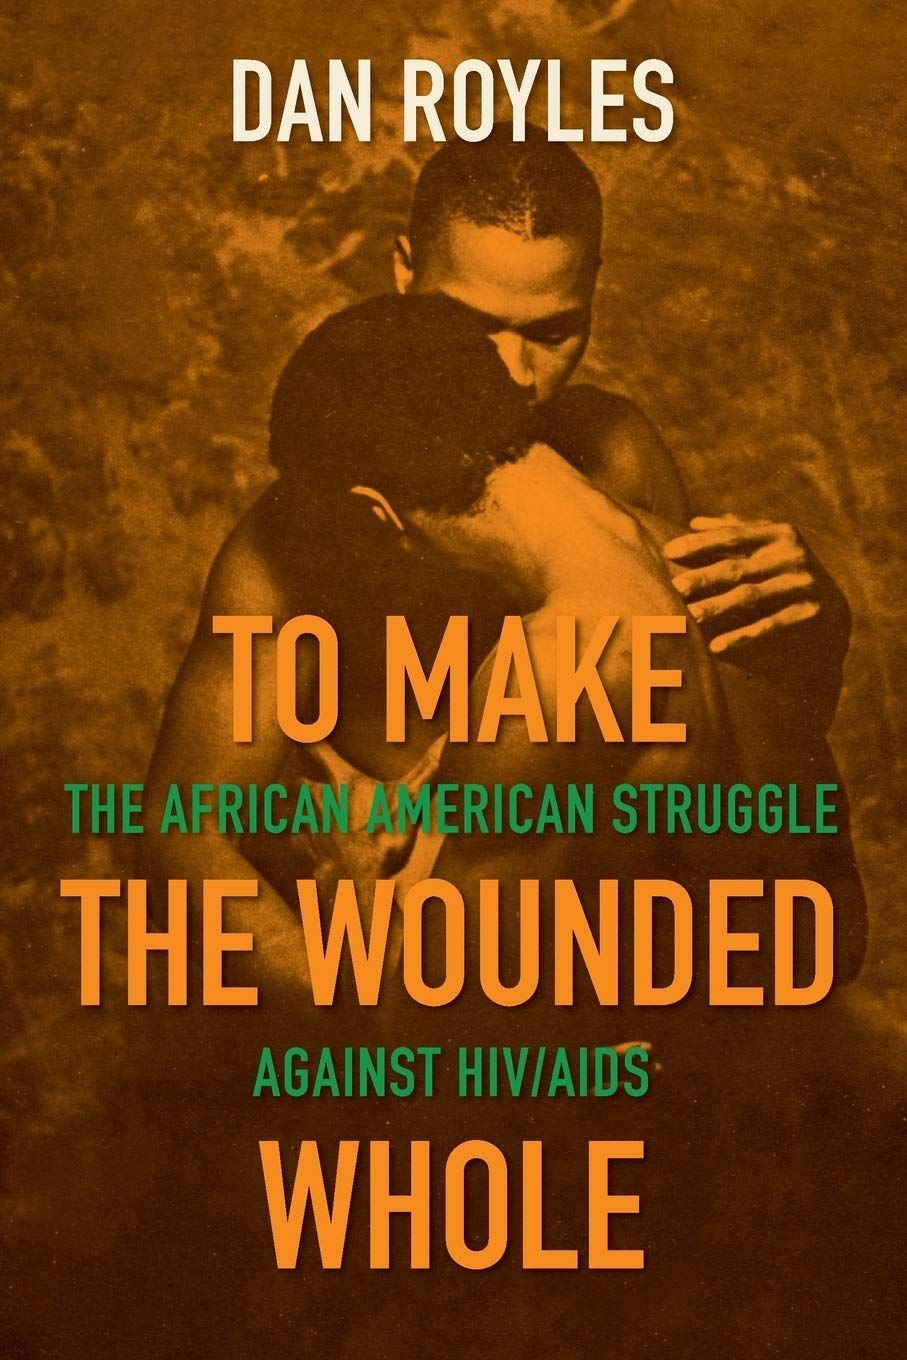 The Roots of African American AIDS Activism: On Dan Royles’s “To Make the Wounded Whole”